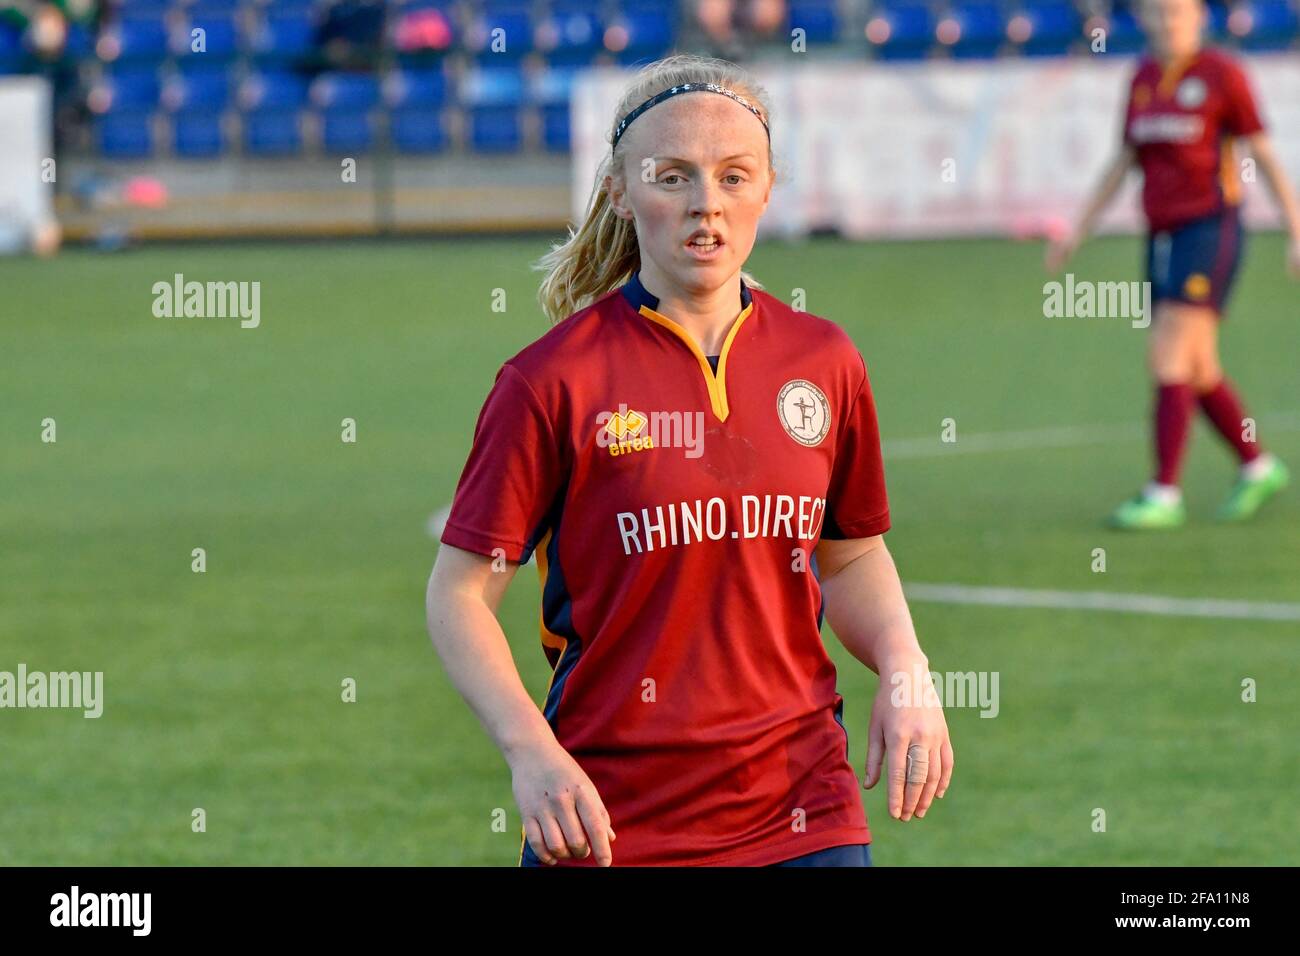 Cardiff, Wales. 21 April, 2021. Sophie Hancocks of Cardiff Met Women during the Welsh Premier Women's League match between Cardiff Met Women and Swansea City Ladies at the Cyncoed Campus in Cardiff, Wales, UK on 21, April 2021. Credit: Duncan Thomas/Majestic Media/Alamy Live News. Stock Photo